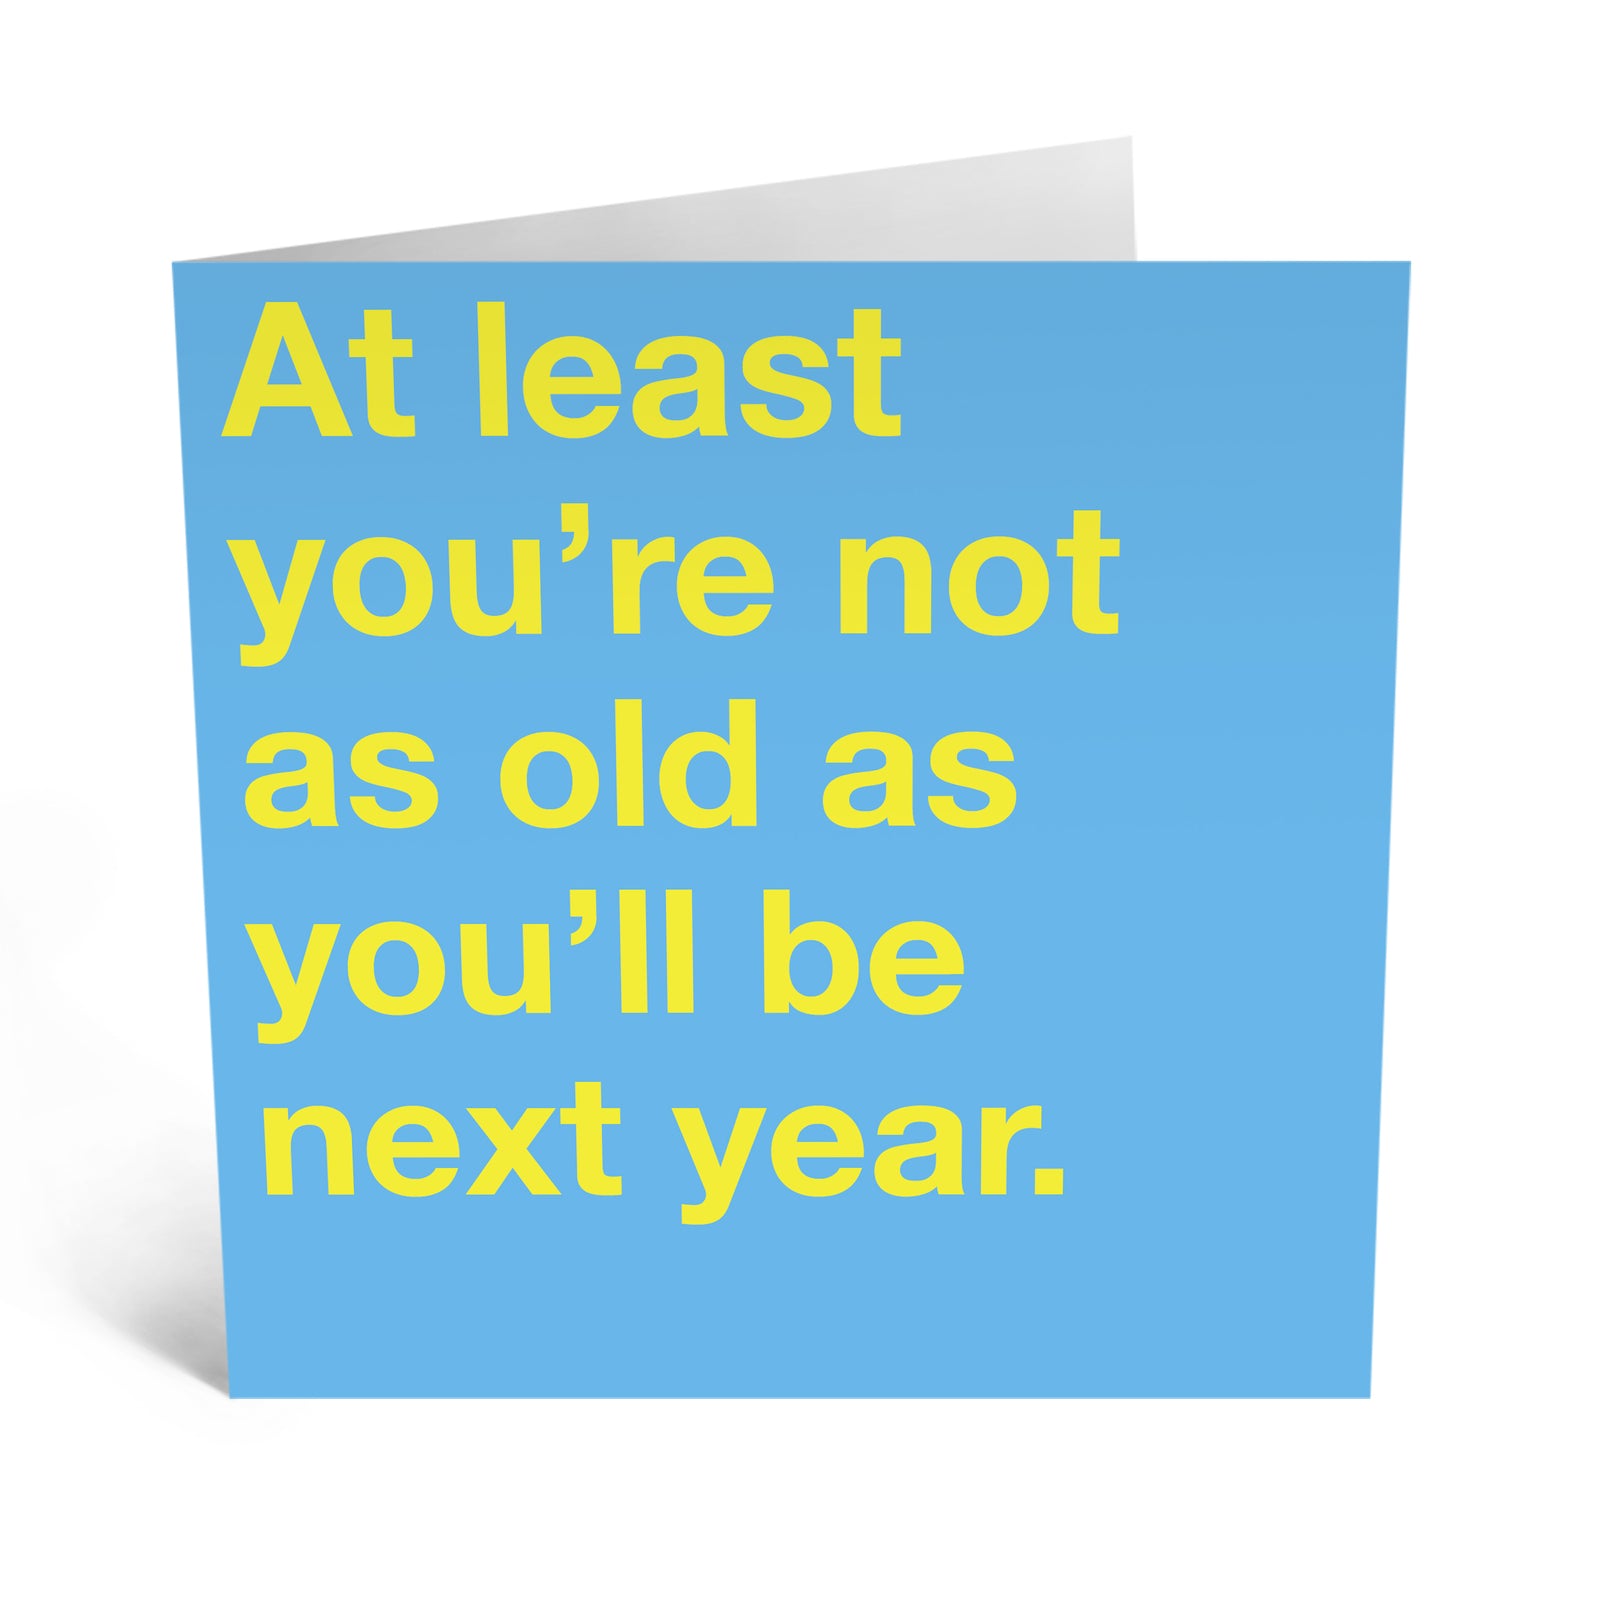 At Least You're Not As Old As You'll Be Next Year.